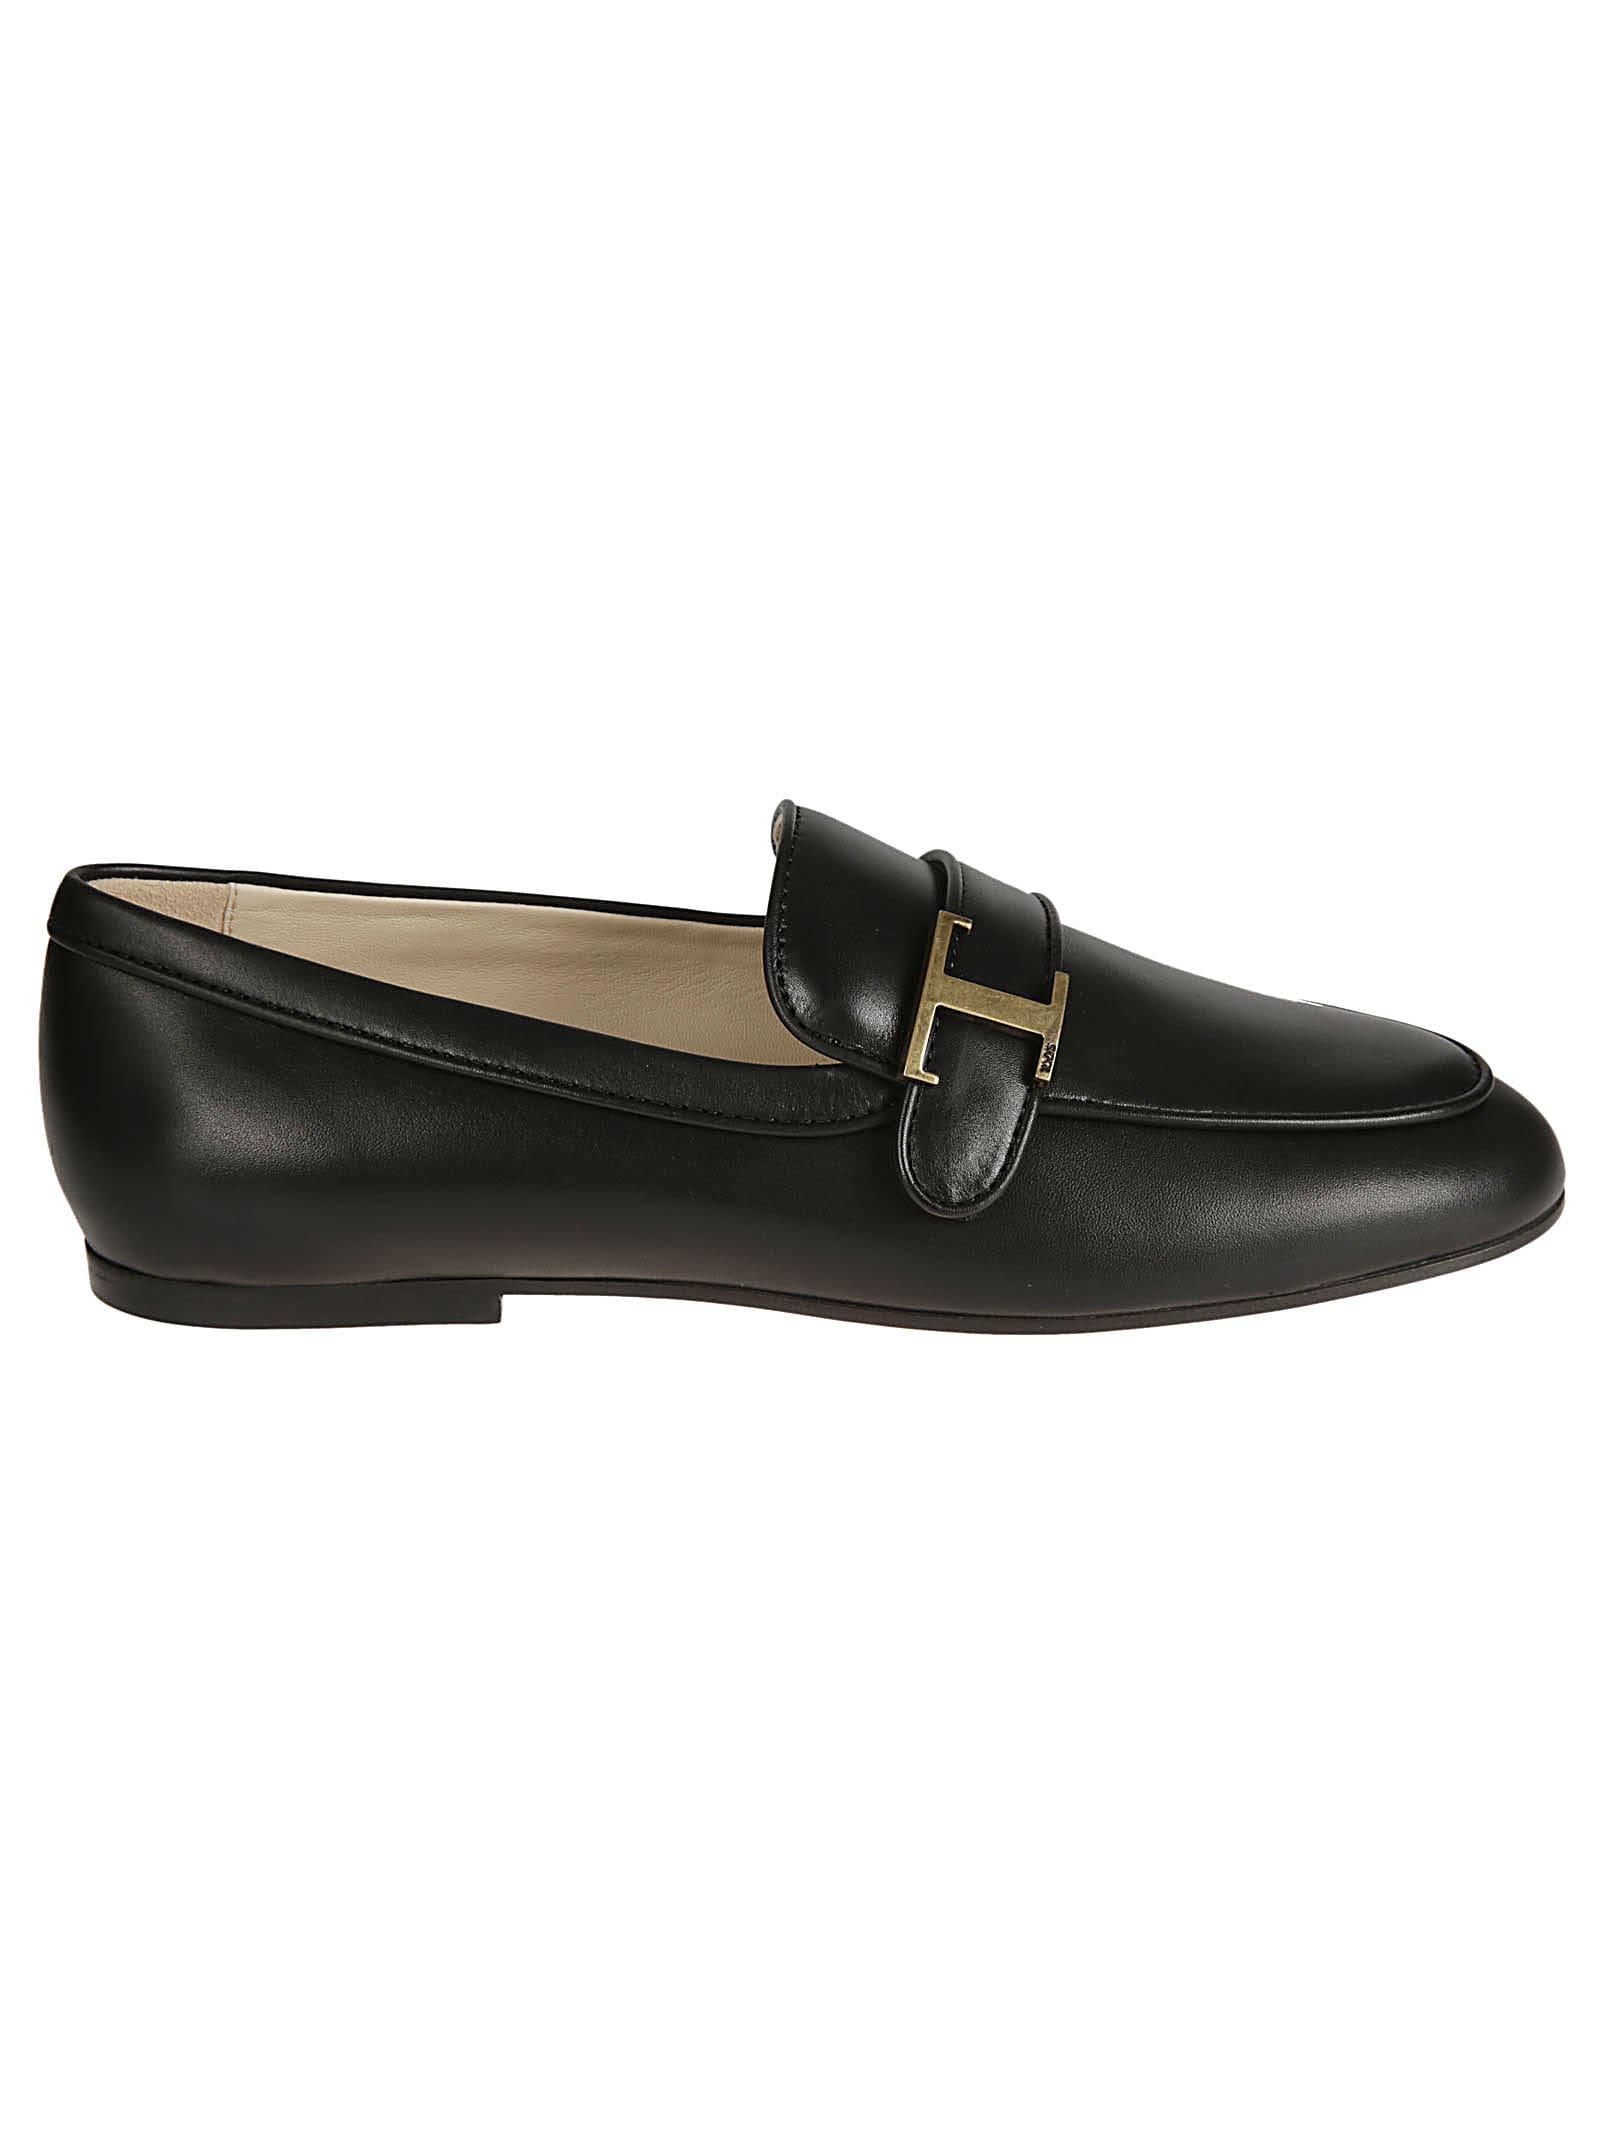 Tods Classic Side T Plaque Loafers